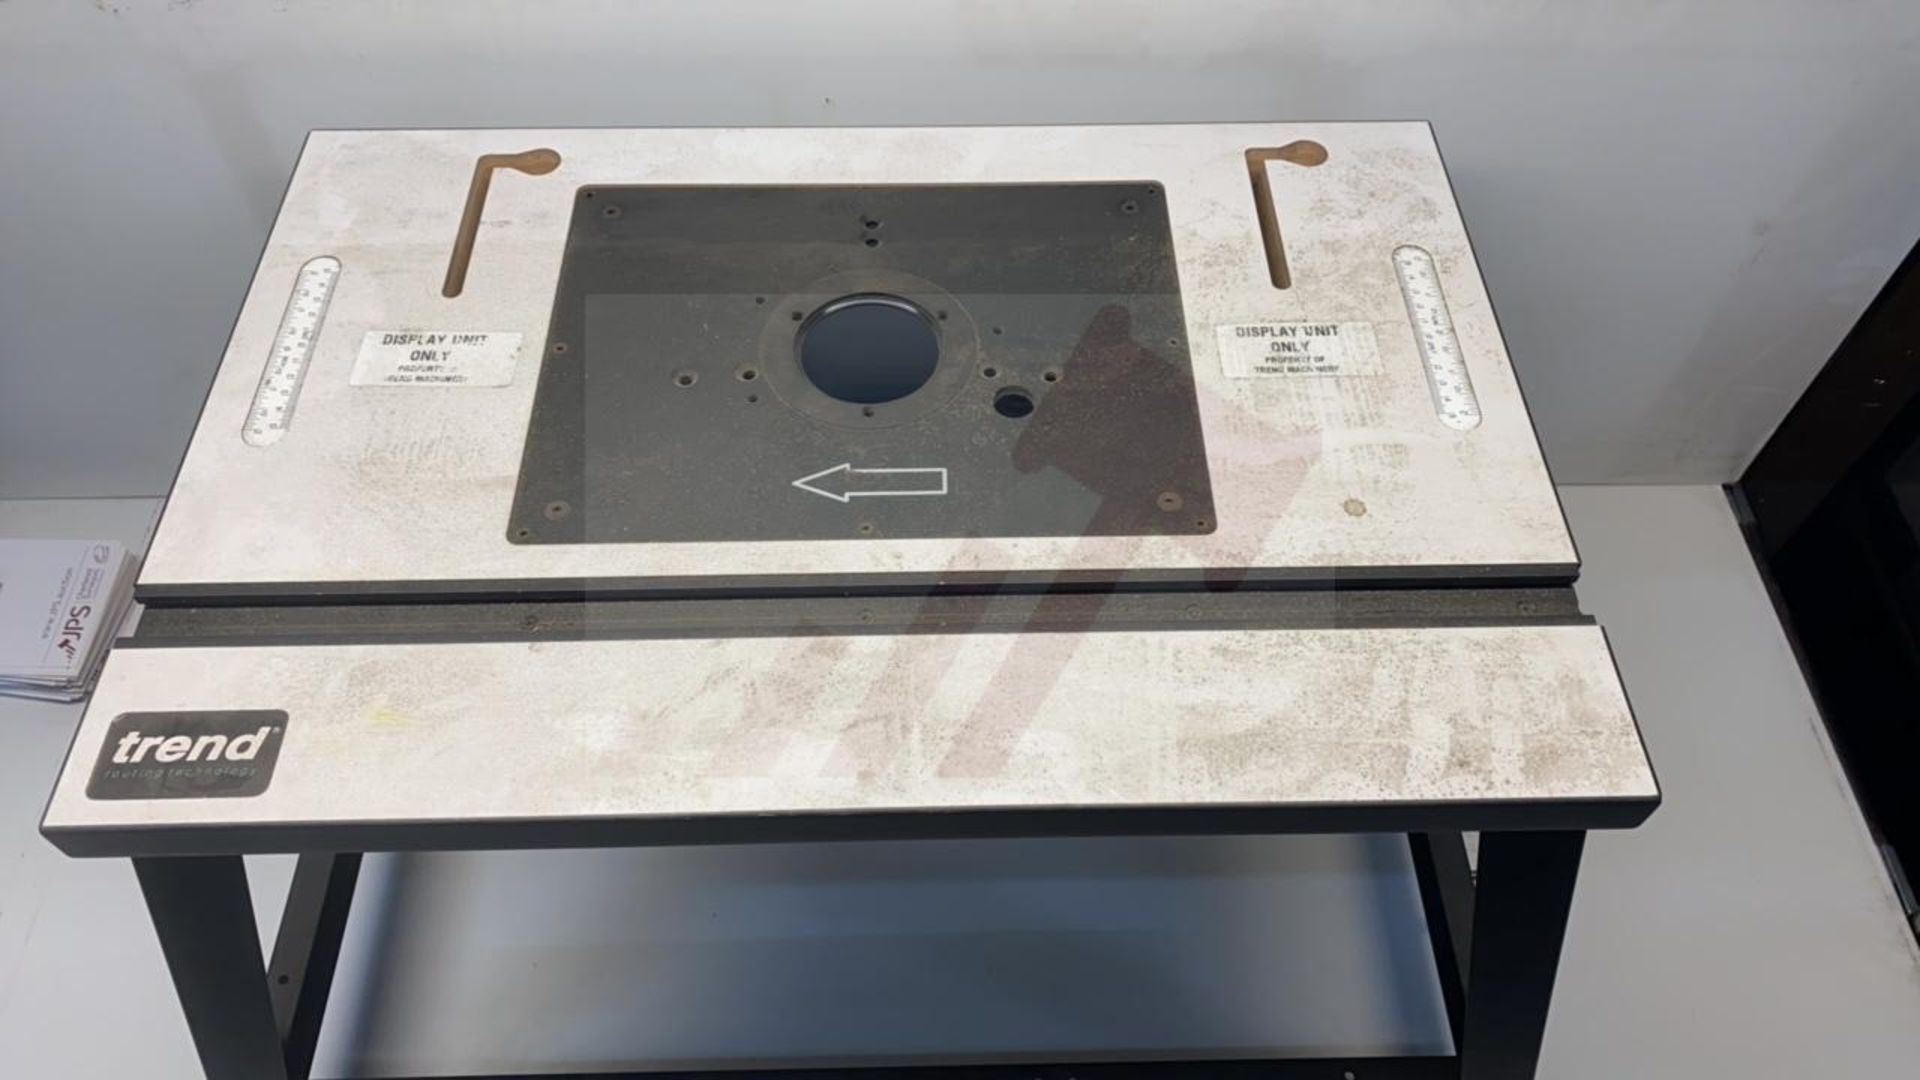 Trend CRT/MK3 240v CraftPro Router Table MK3, Base Only, Missing Parts As Seen In Photos - Image 2 of 5